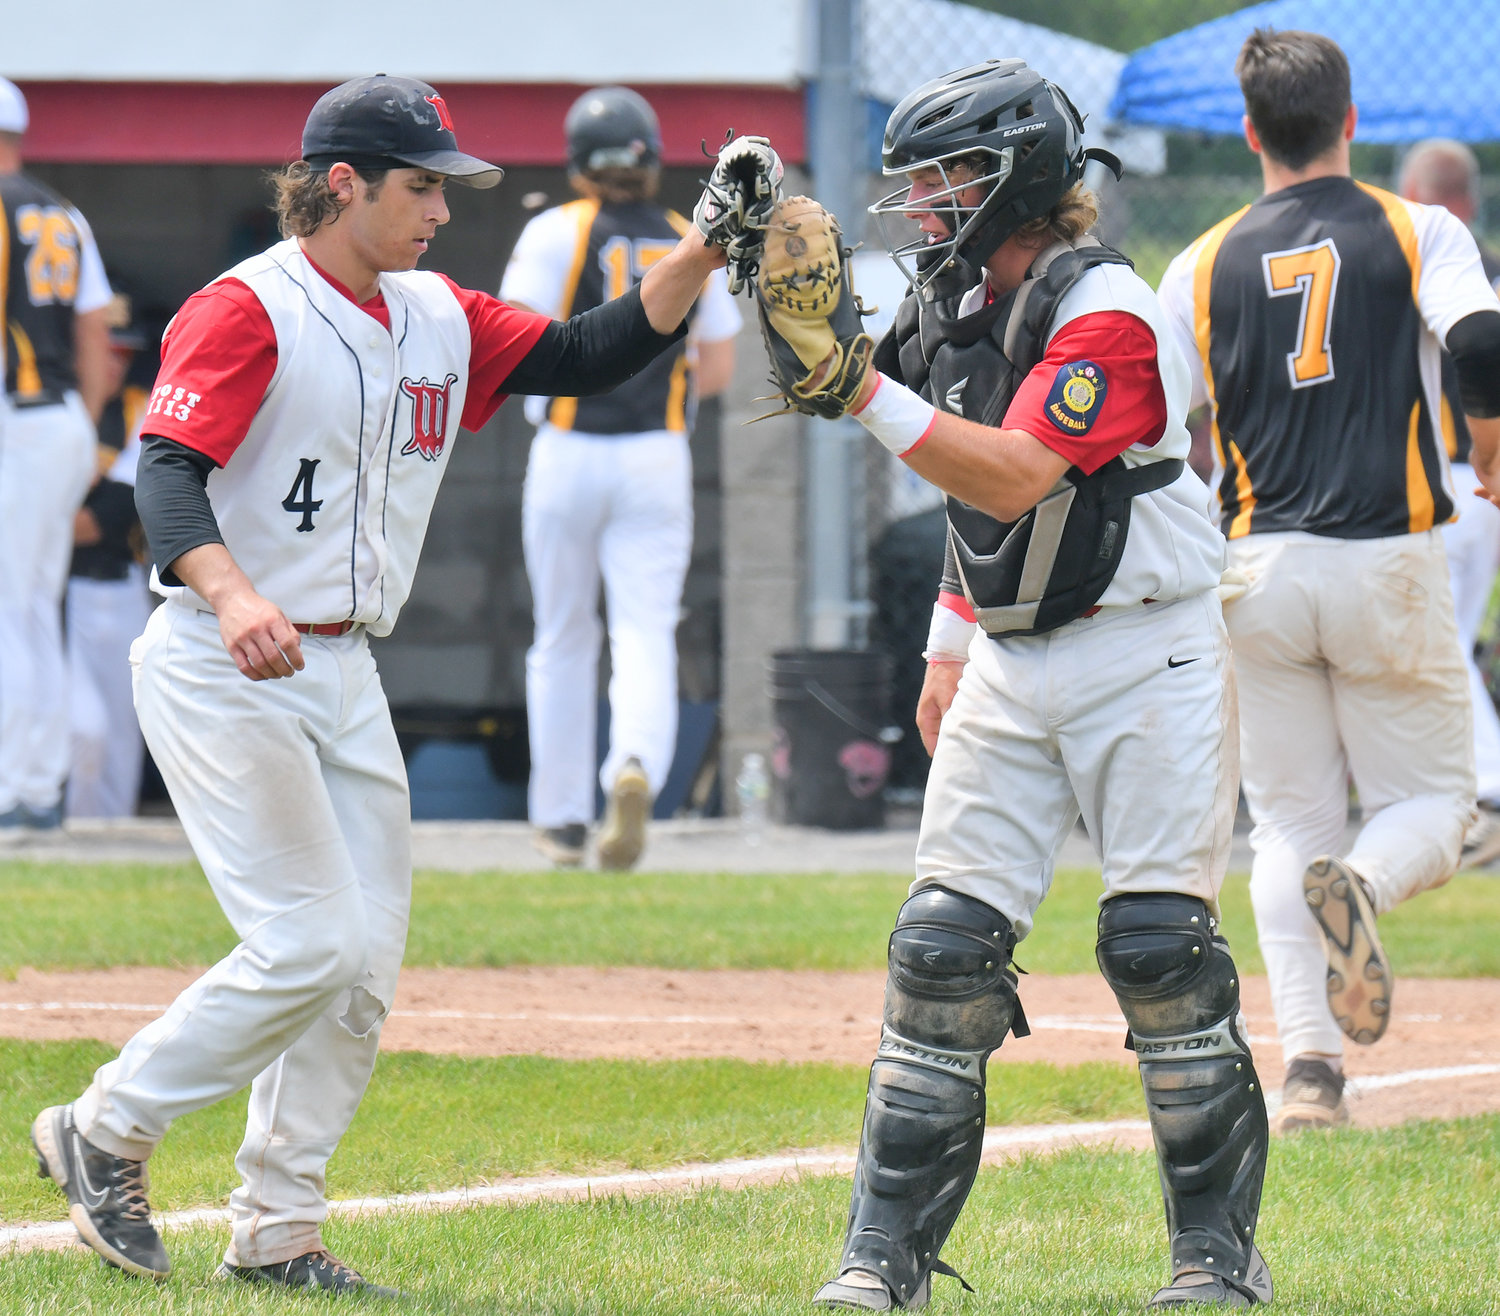 Whitestown Post's Caleb Miller, left, and catcher Jerry Fiorini celebrate after the team retired Harpursville Post in the second inning of an American Legion tournament game Saturday at DeLutis Field in Rome. Miller pitched six innings to help Whitestown earn a 4-3 win. The team is scheduled to play at 10 a.m. Tuesday in Saugerties.